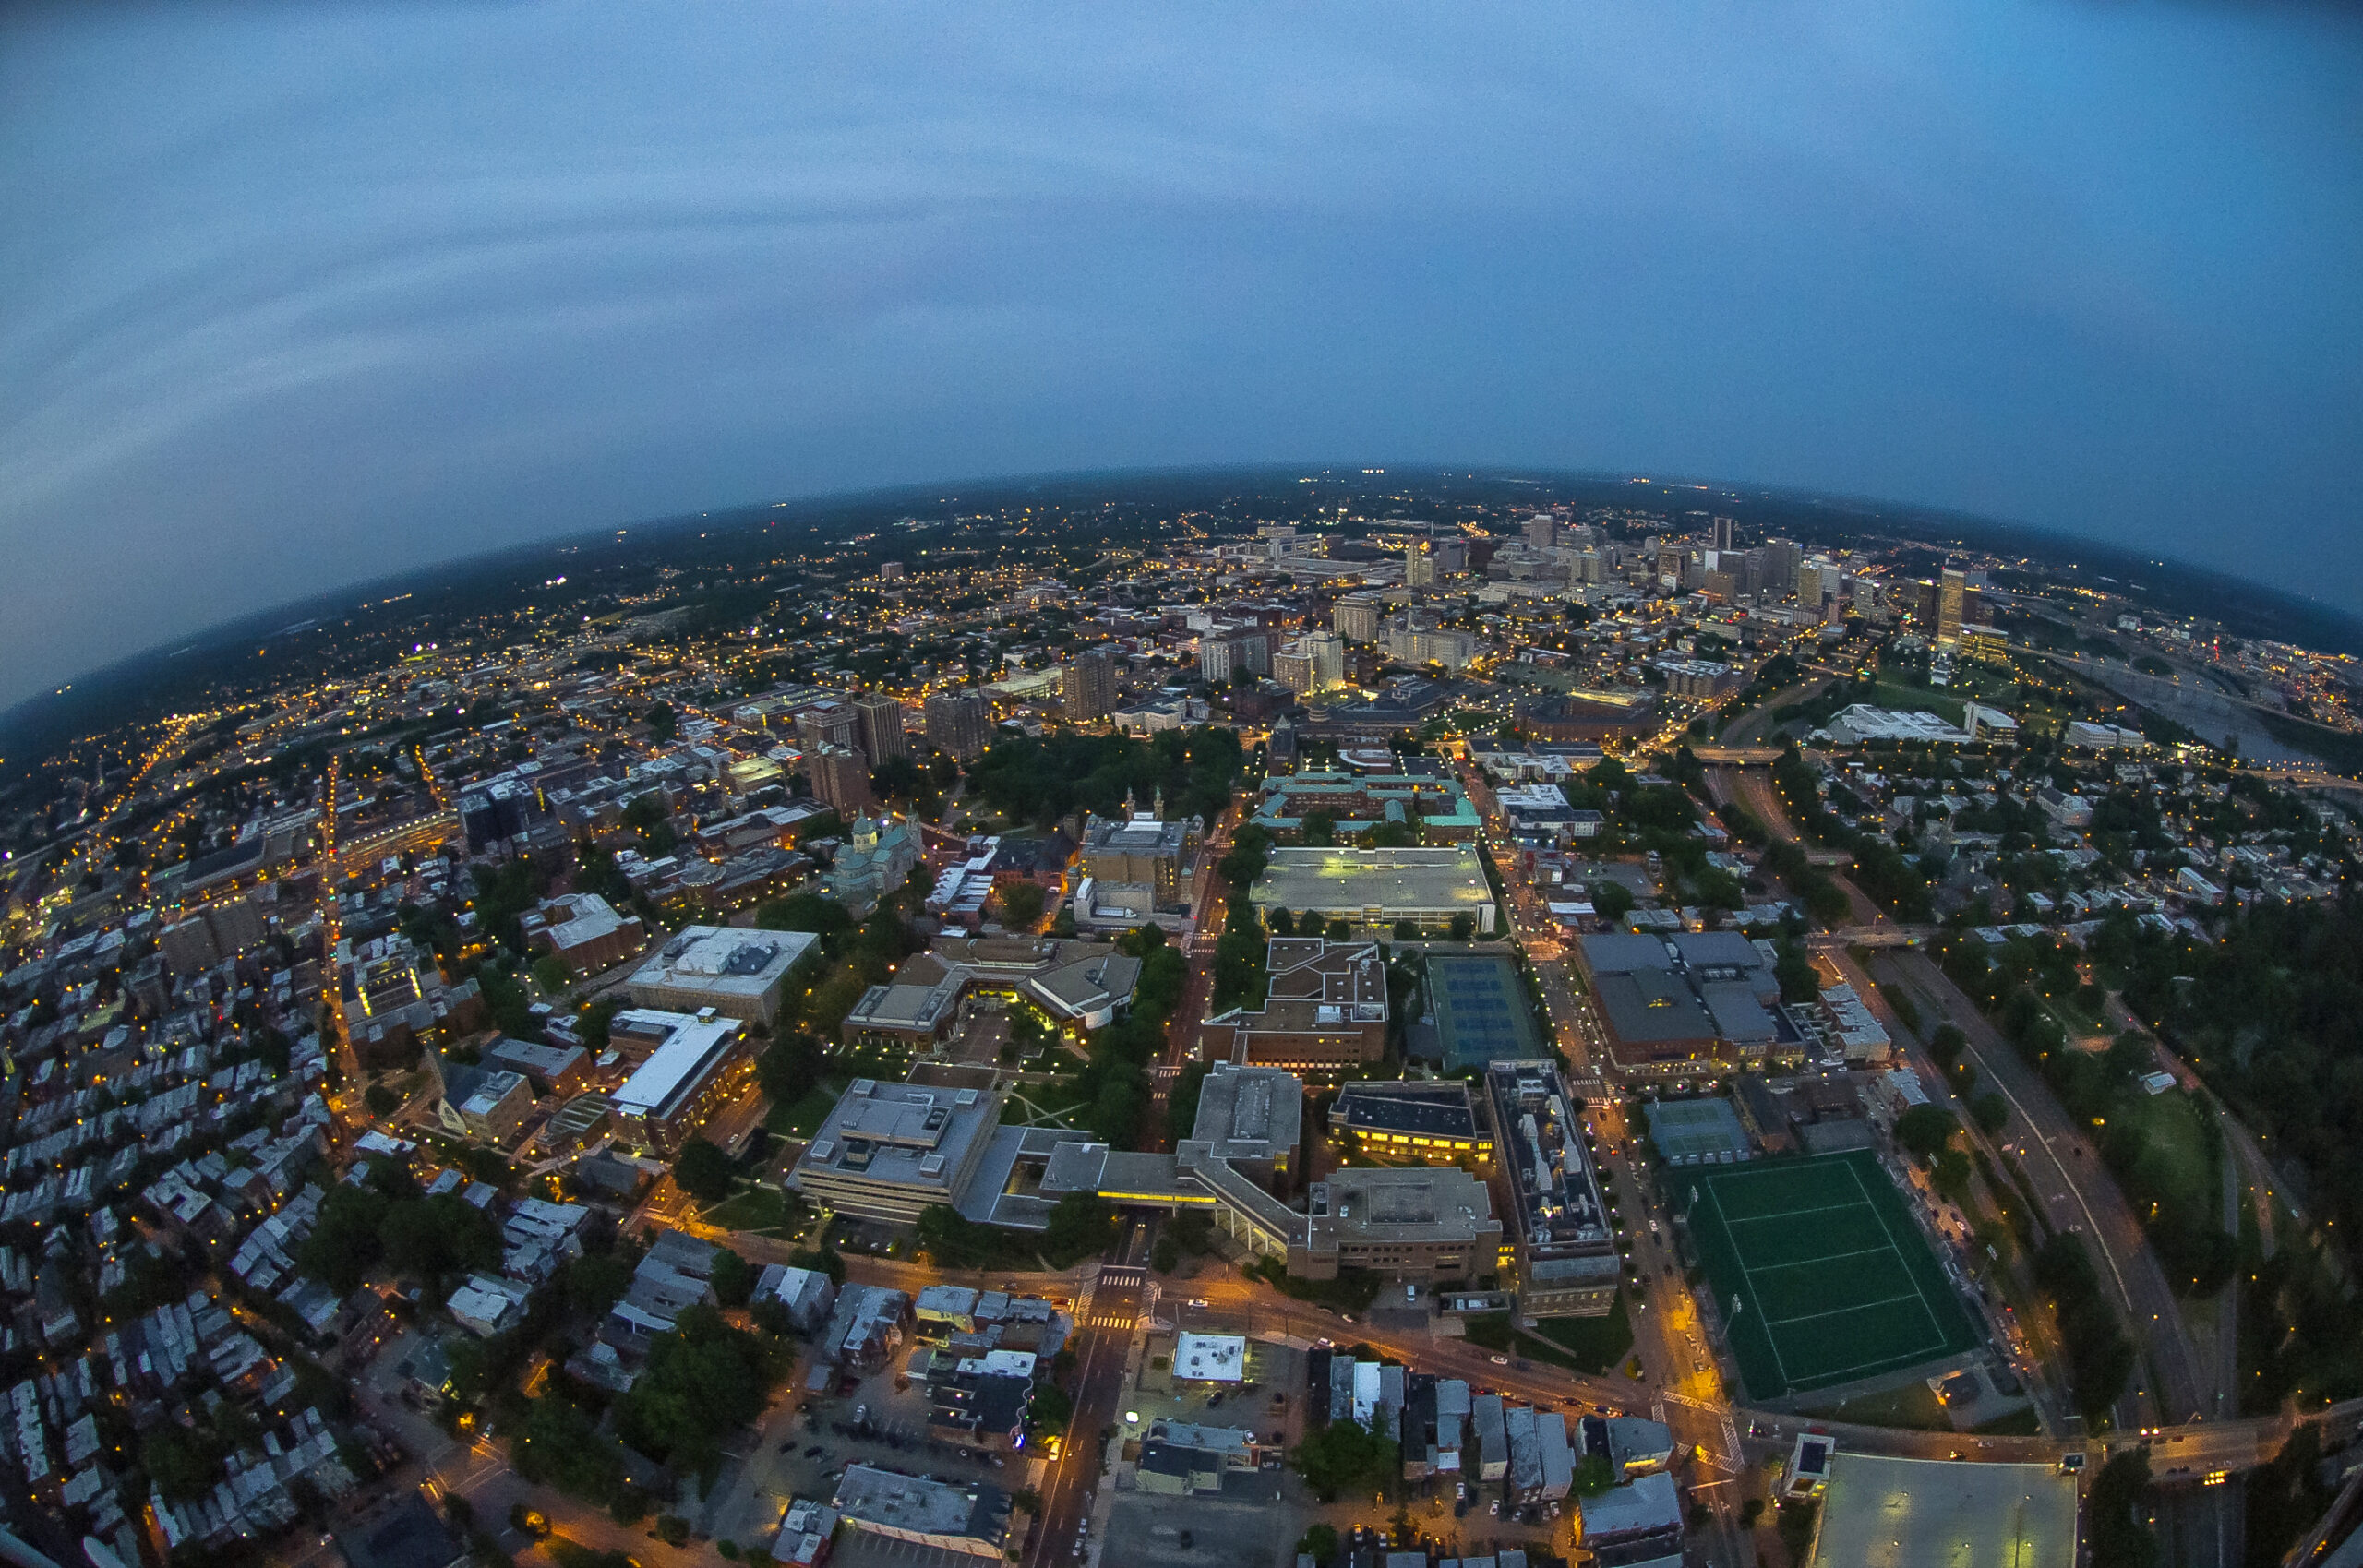 Aerial photography of VCU's Monroe Park campus and downtown Richmond, VA at night time.